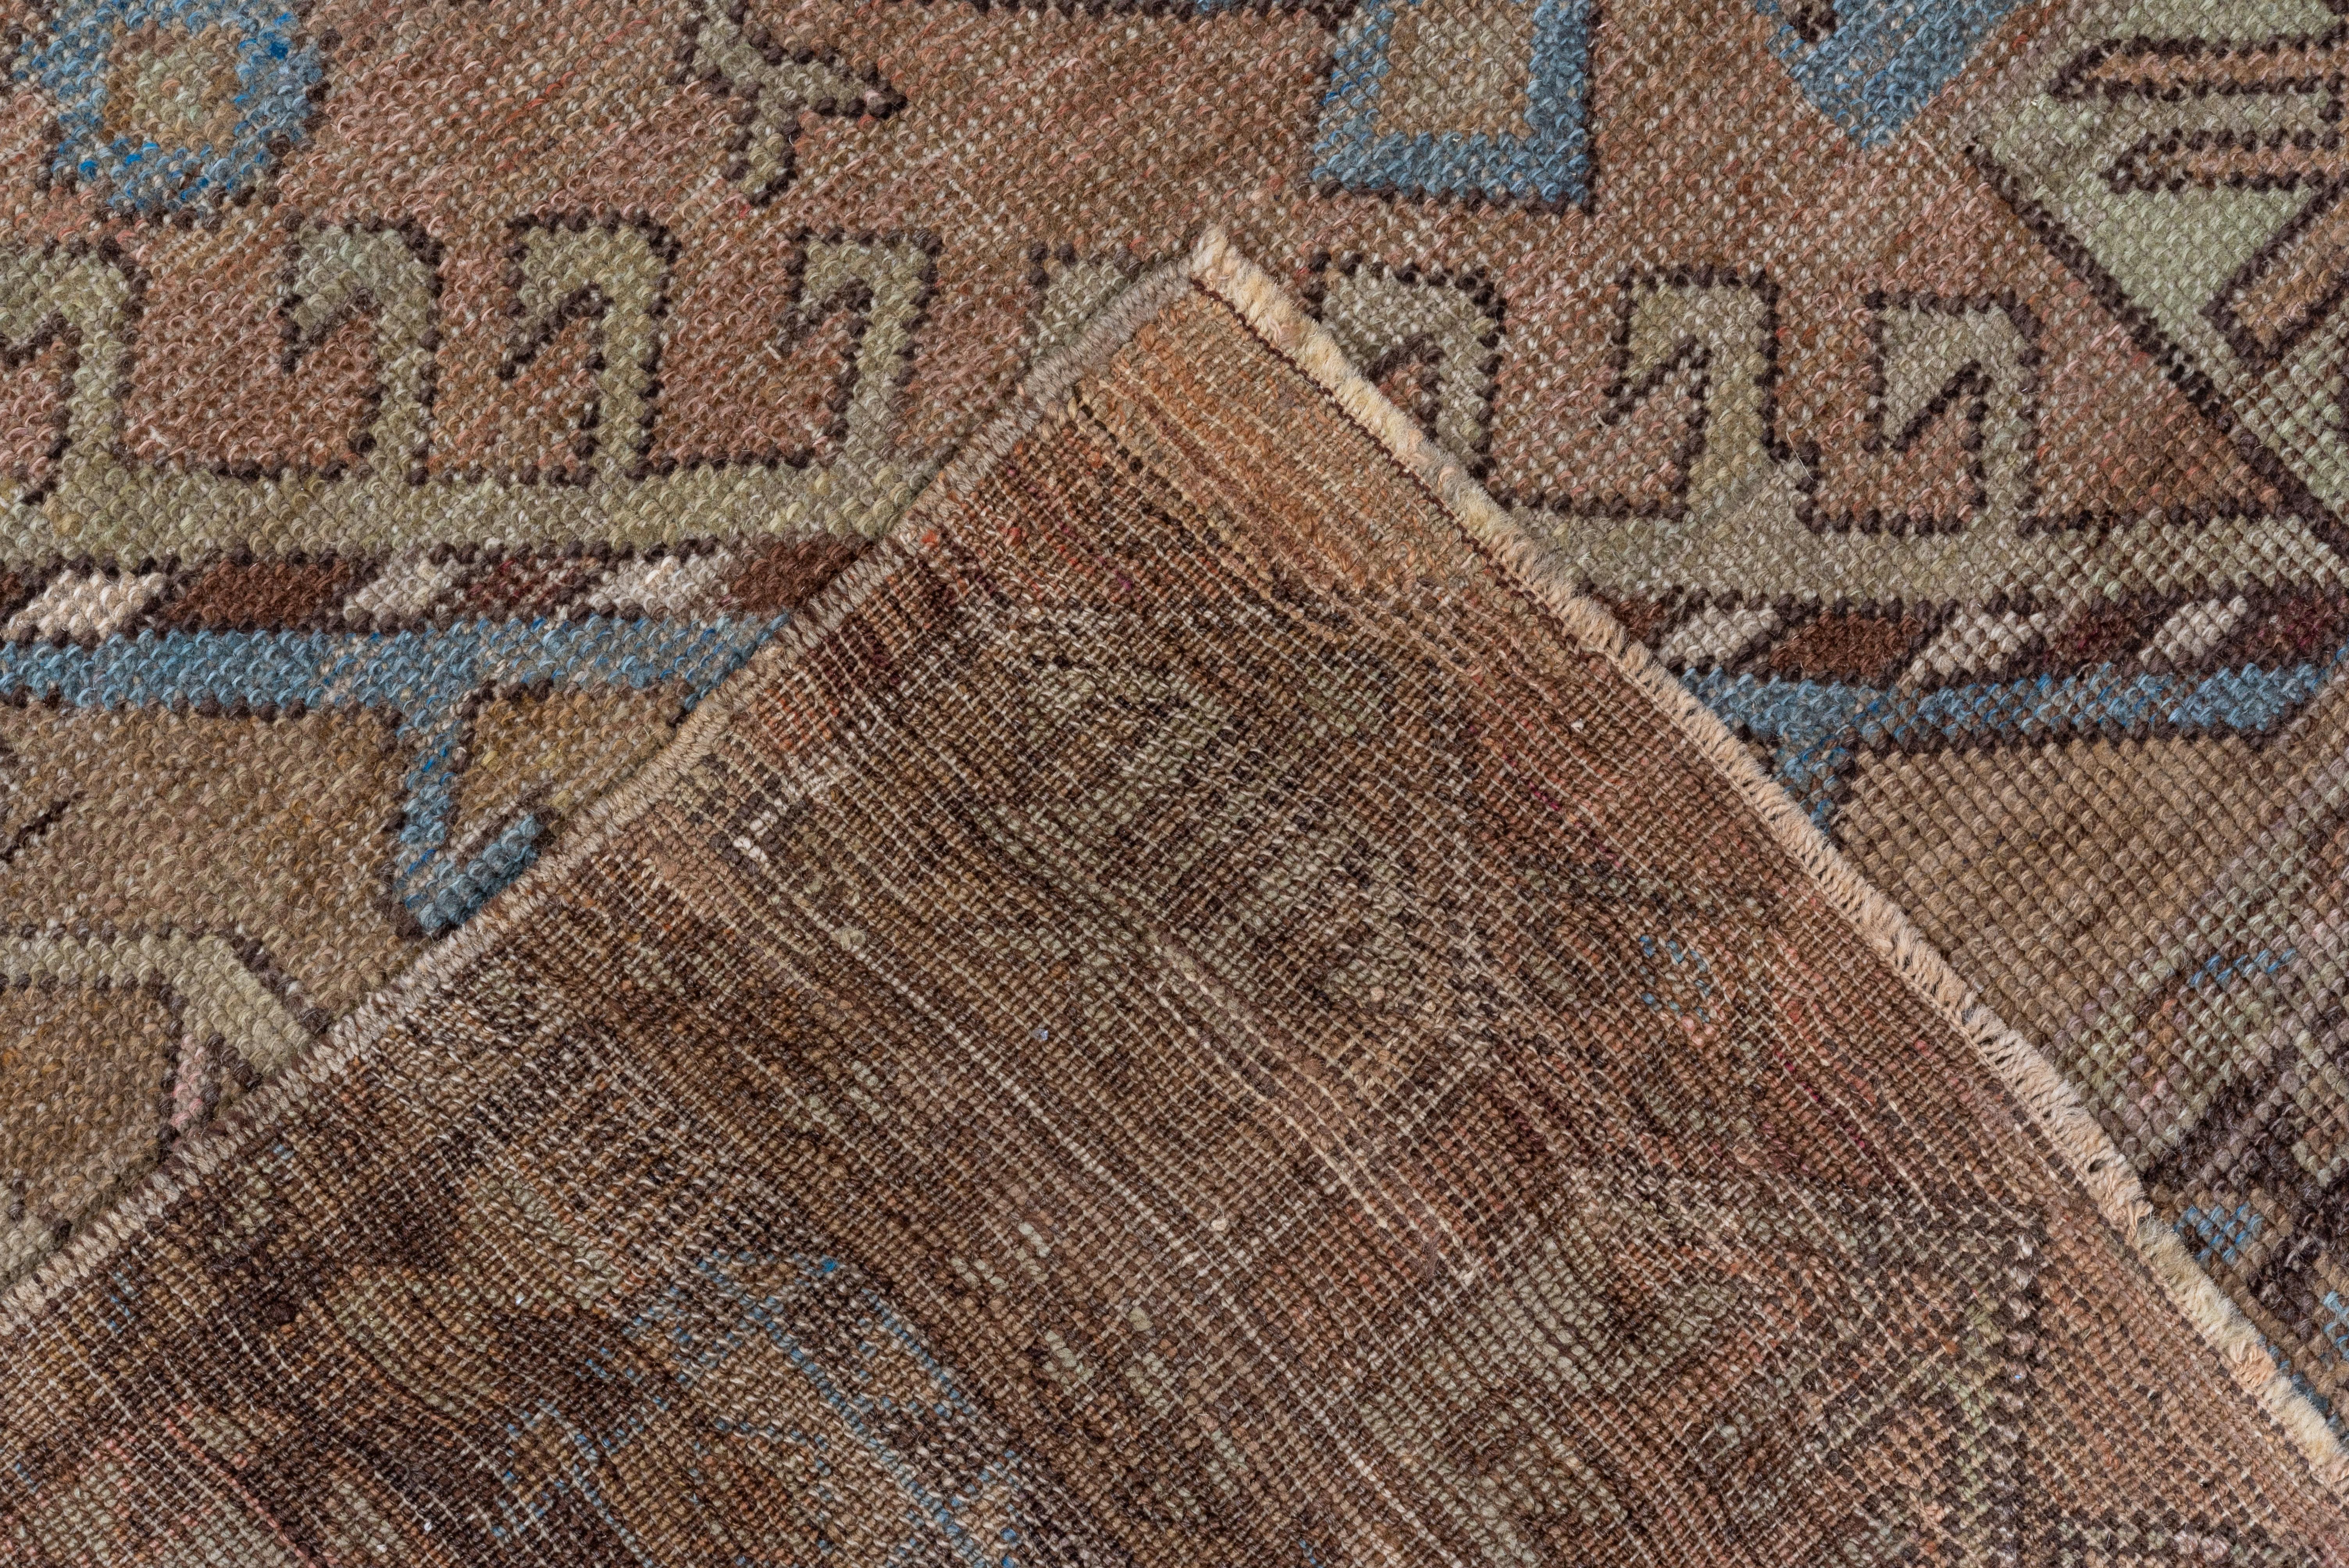 Mid 20th Century Turkish Oushak Gallery Rug, Brown Field & Blue Accents For Sale 2